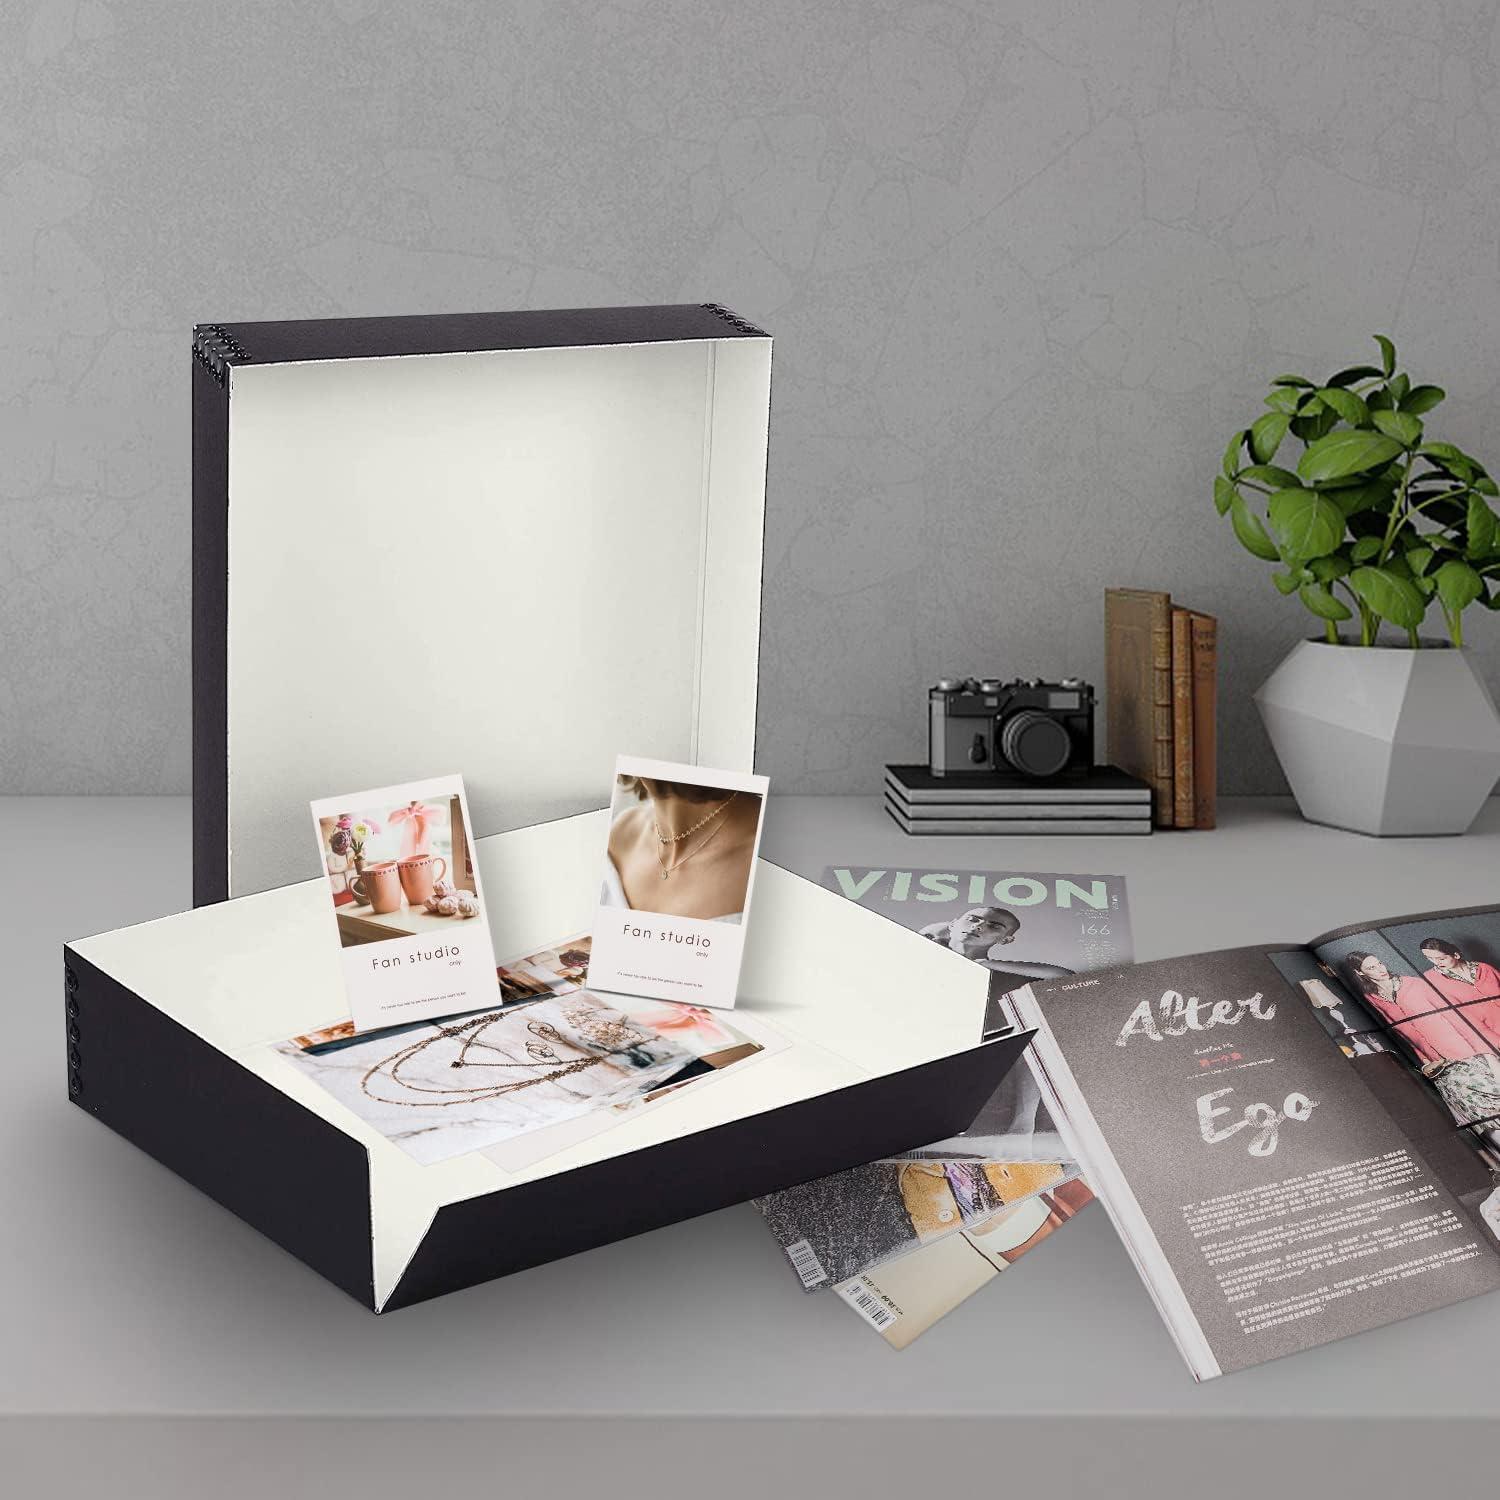 Lineco, 9x12 Gray Color, Museum Archival Storage Box, Drop Front Design.  Acid-Free with Metal Edge. Protects Picture Longevity, Organize Photos